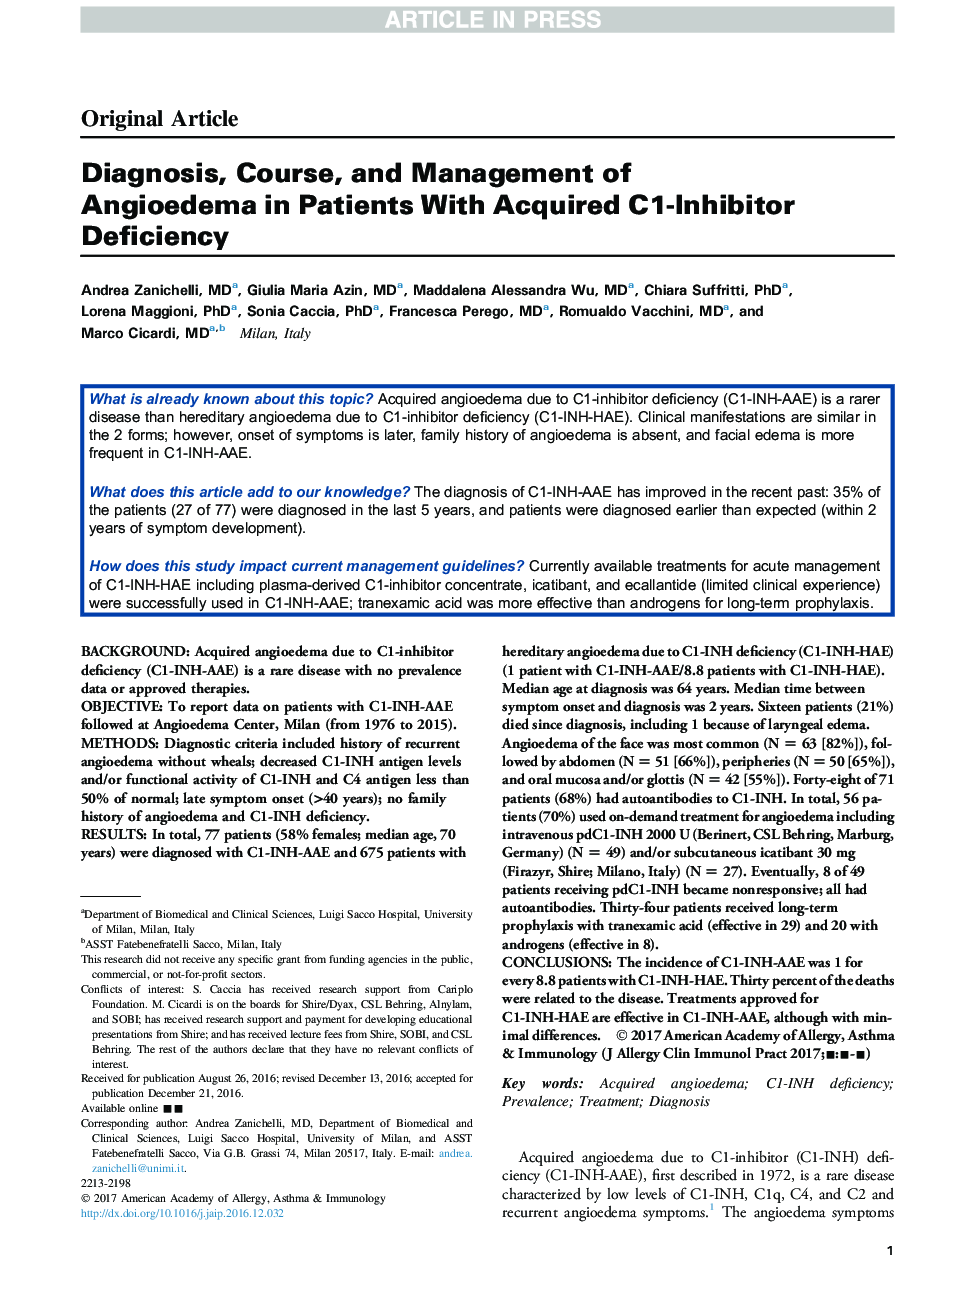 Diagnosis, Course, and Management of Angioedema in Patients With Acquired C1-Inhibitor Deficiency